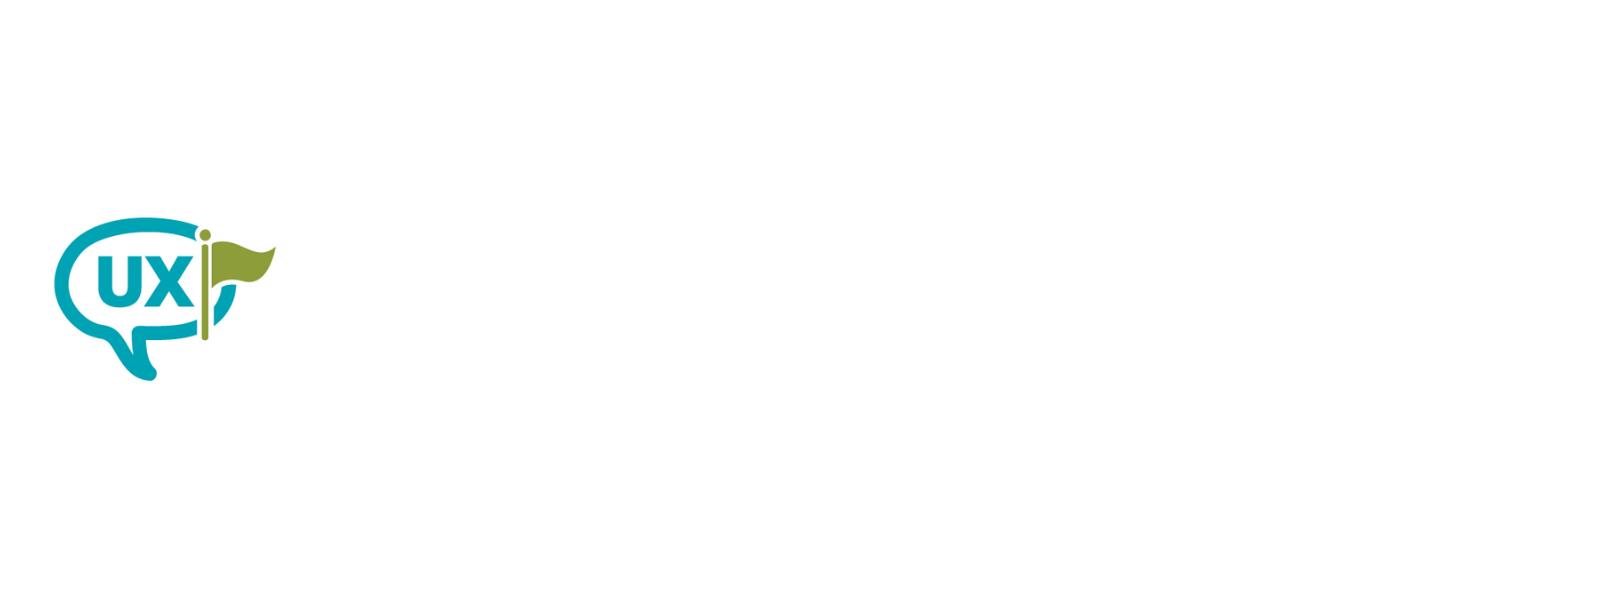 Free Intensive.May 17-21. Led by Jared Spool. Game-Changing Experience Visions.